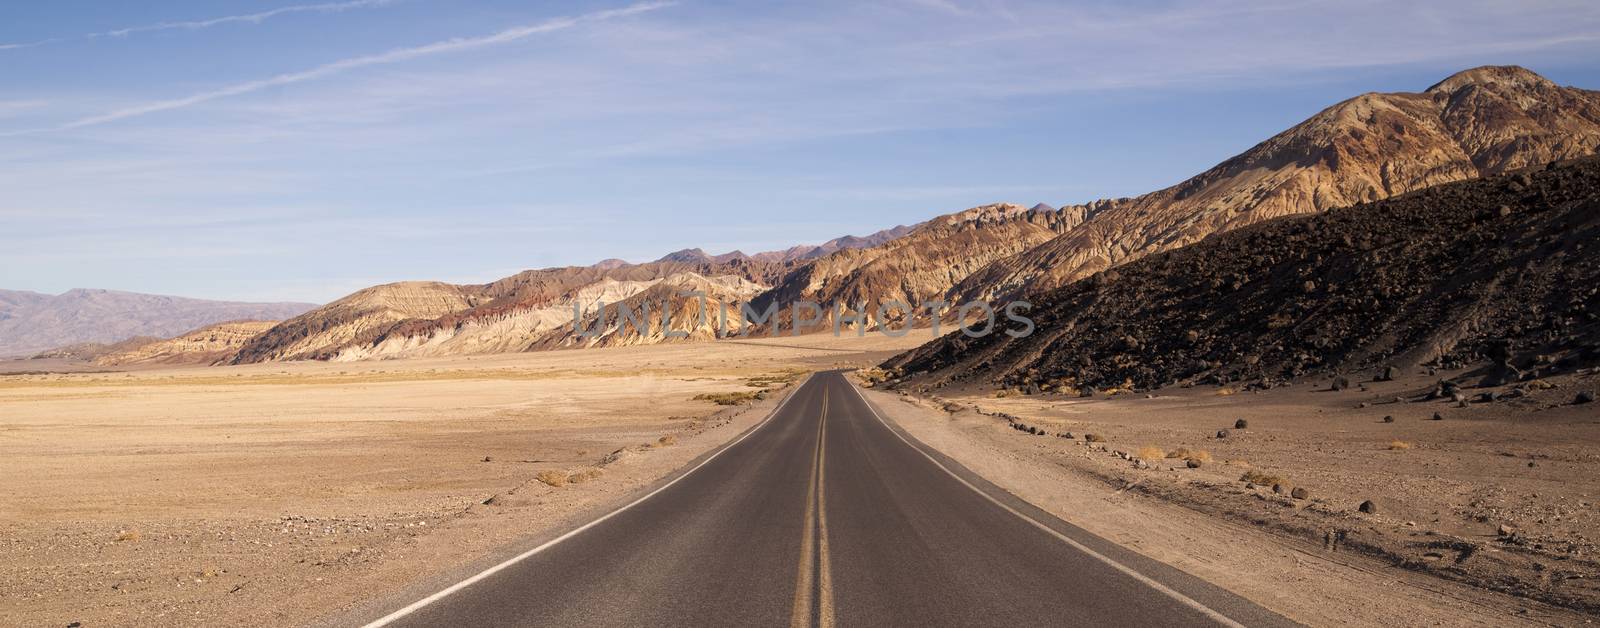 Lonely Long Highway Badwater Basin Death Valley by ChrisBoswell